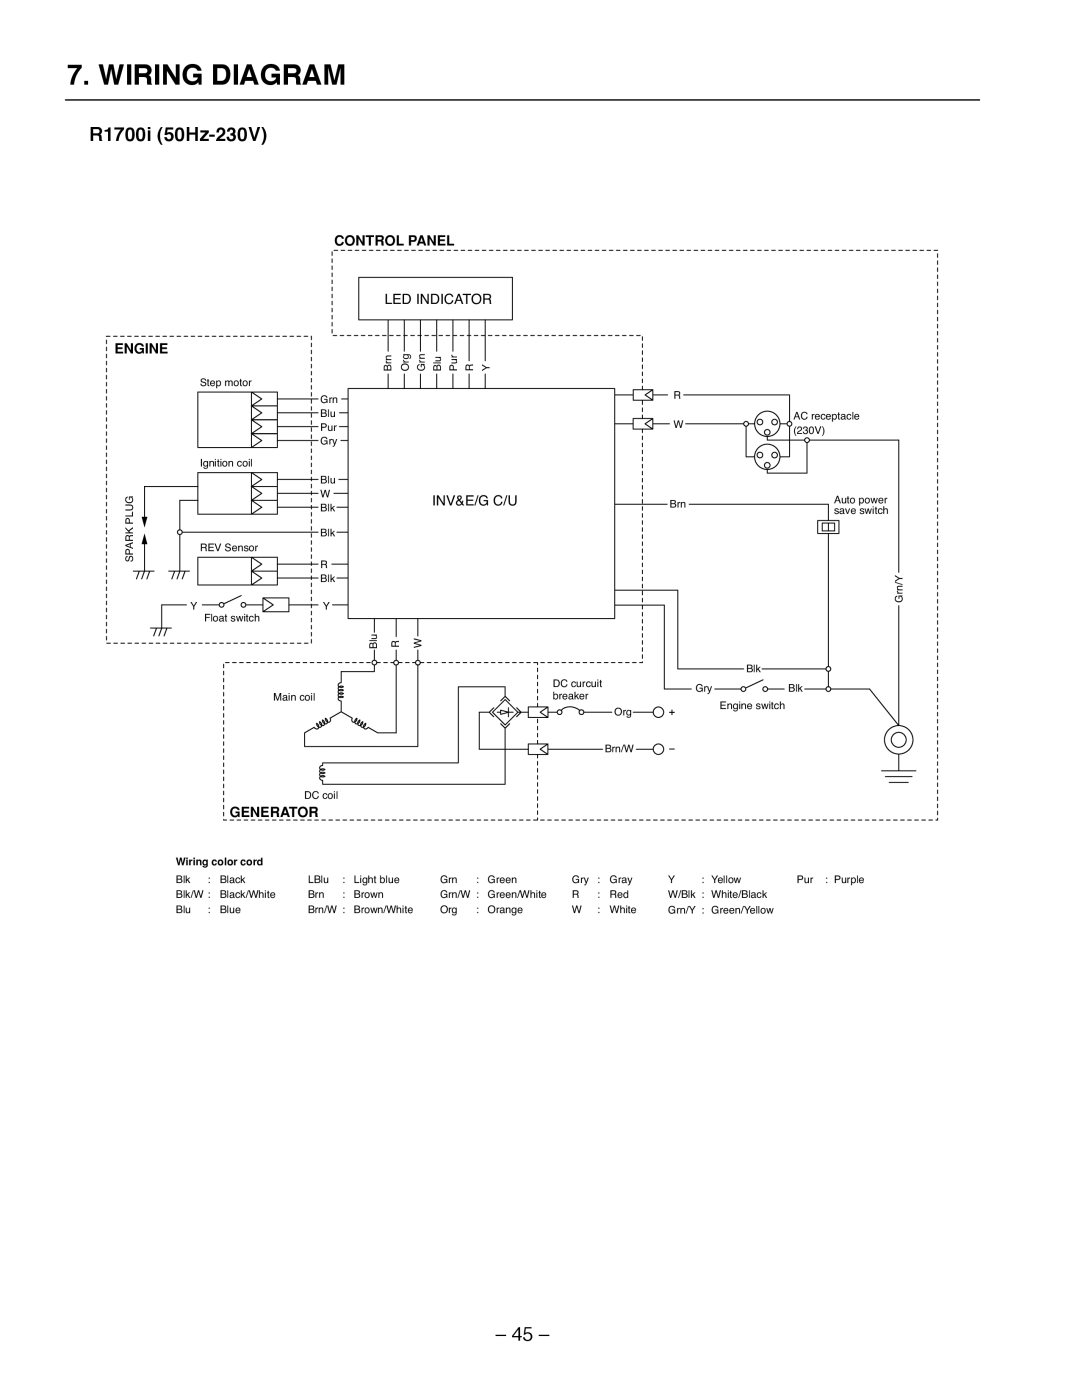 Subaru Robin Power Products service manual Wiring Diagram, R1700i 50Hz-230V, Wiring color cord 